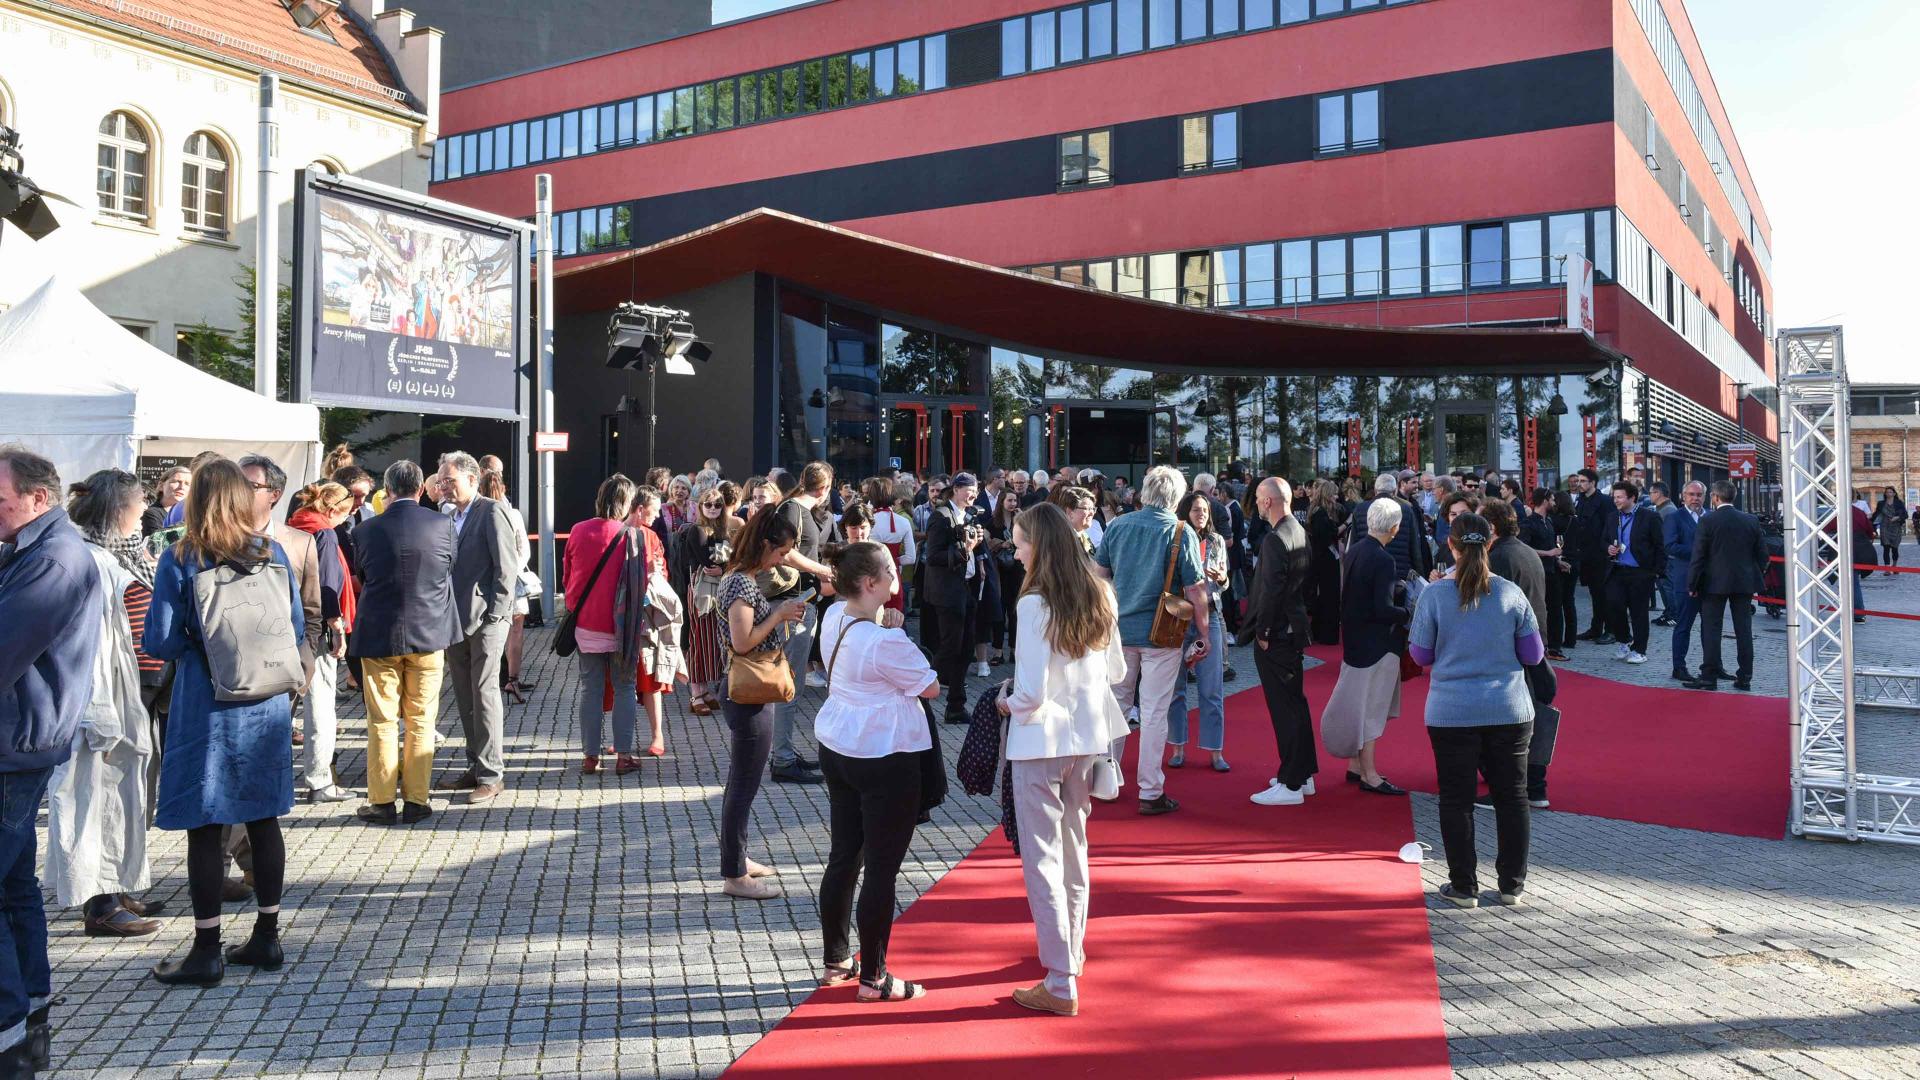 Red new building with people standing in front of it on a red carpet.